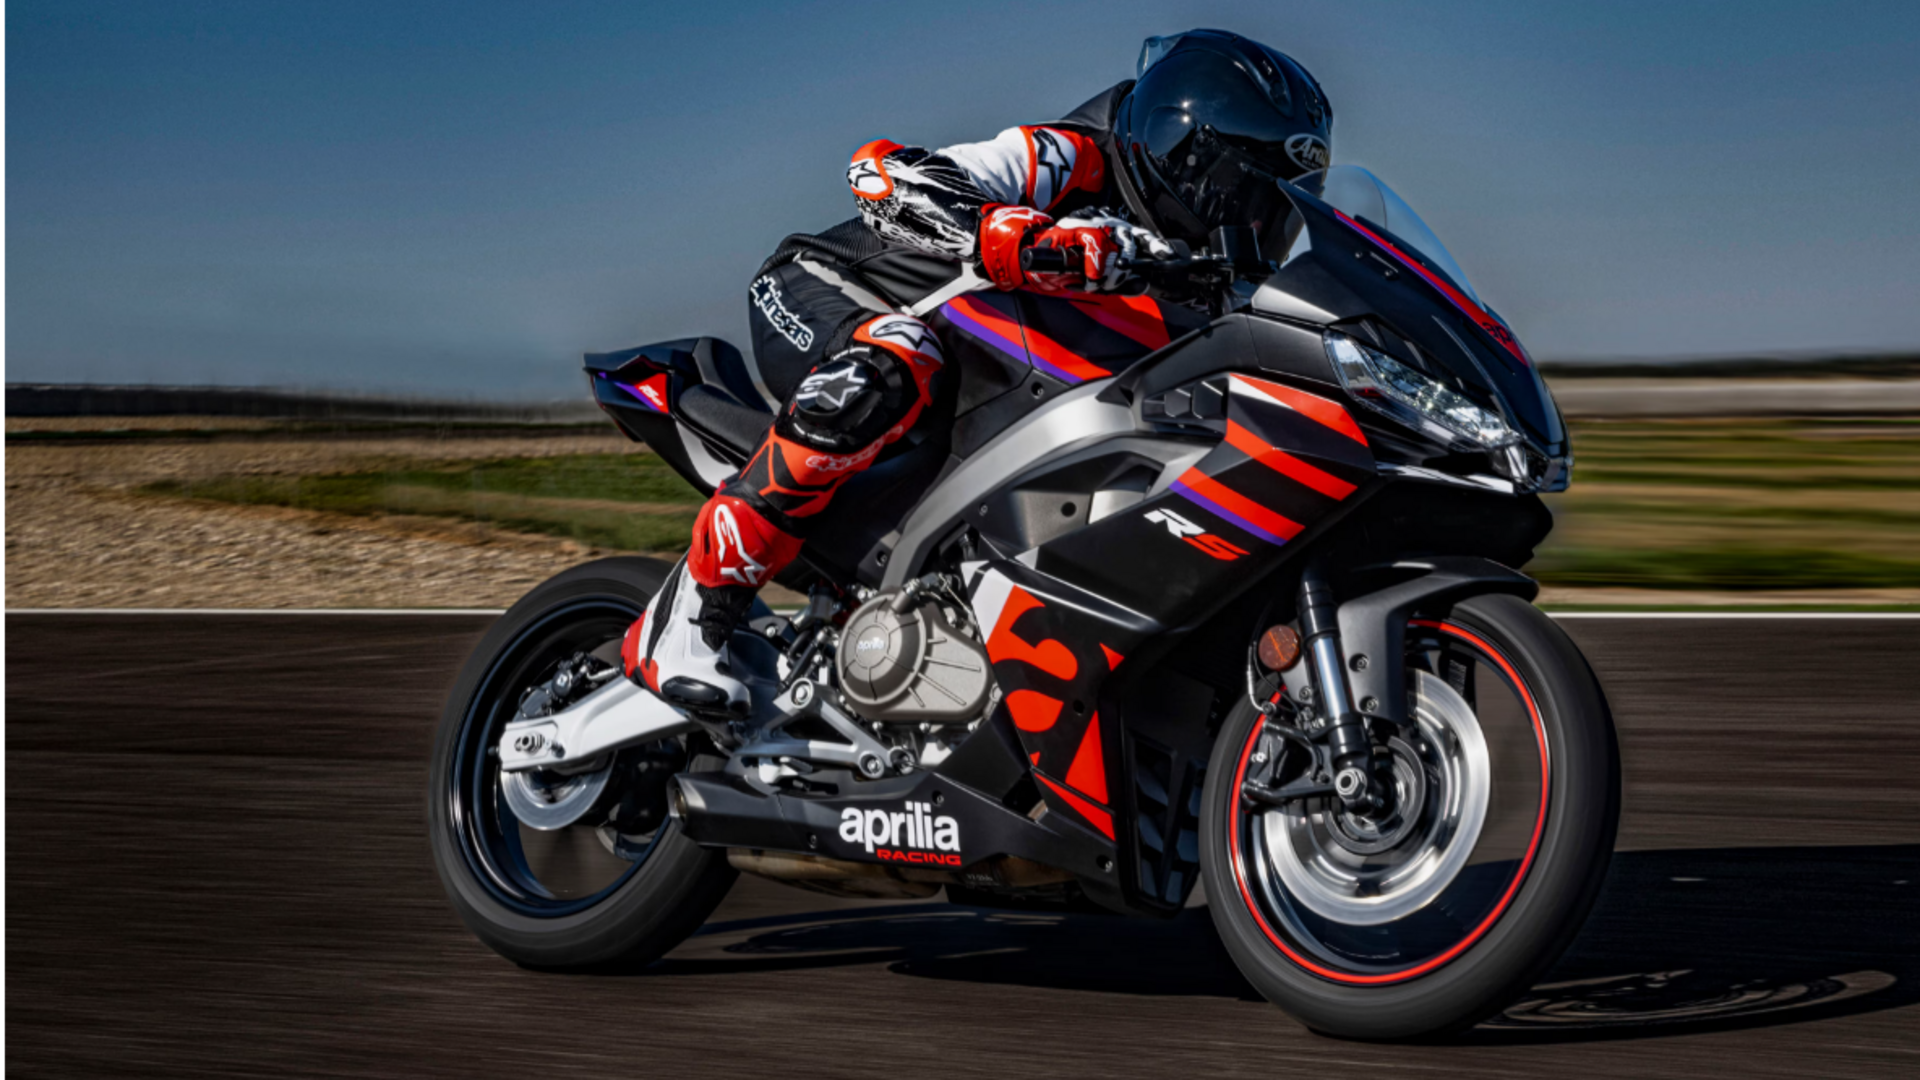 Aprilia's all-new retro-inspired motorcycle in the works: What to expect